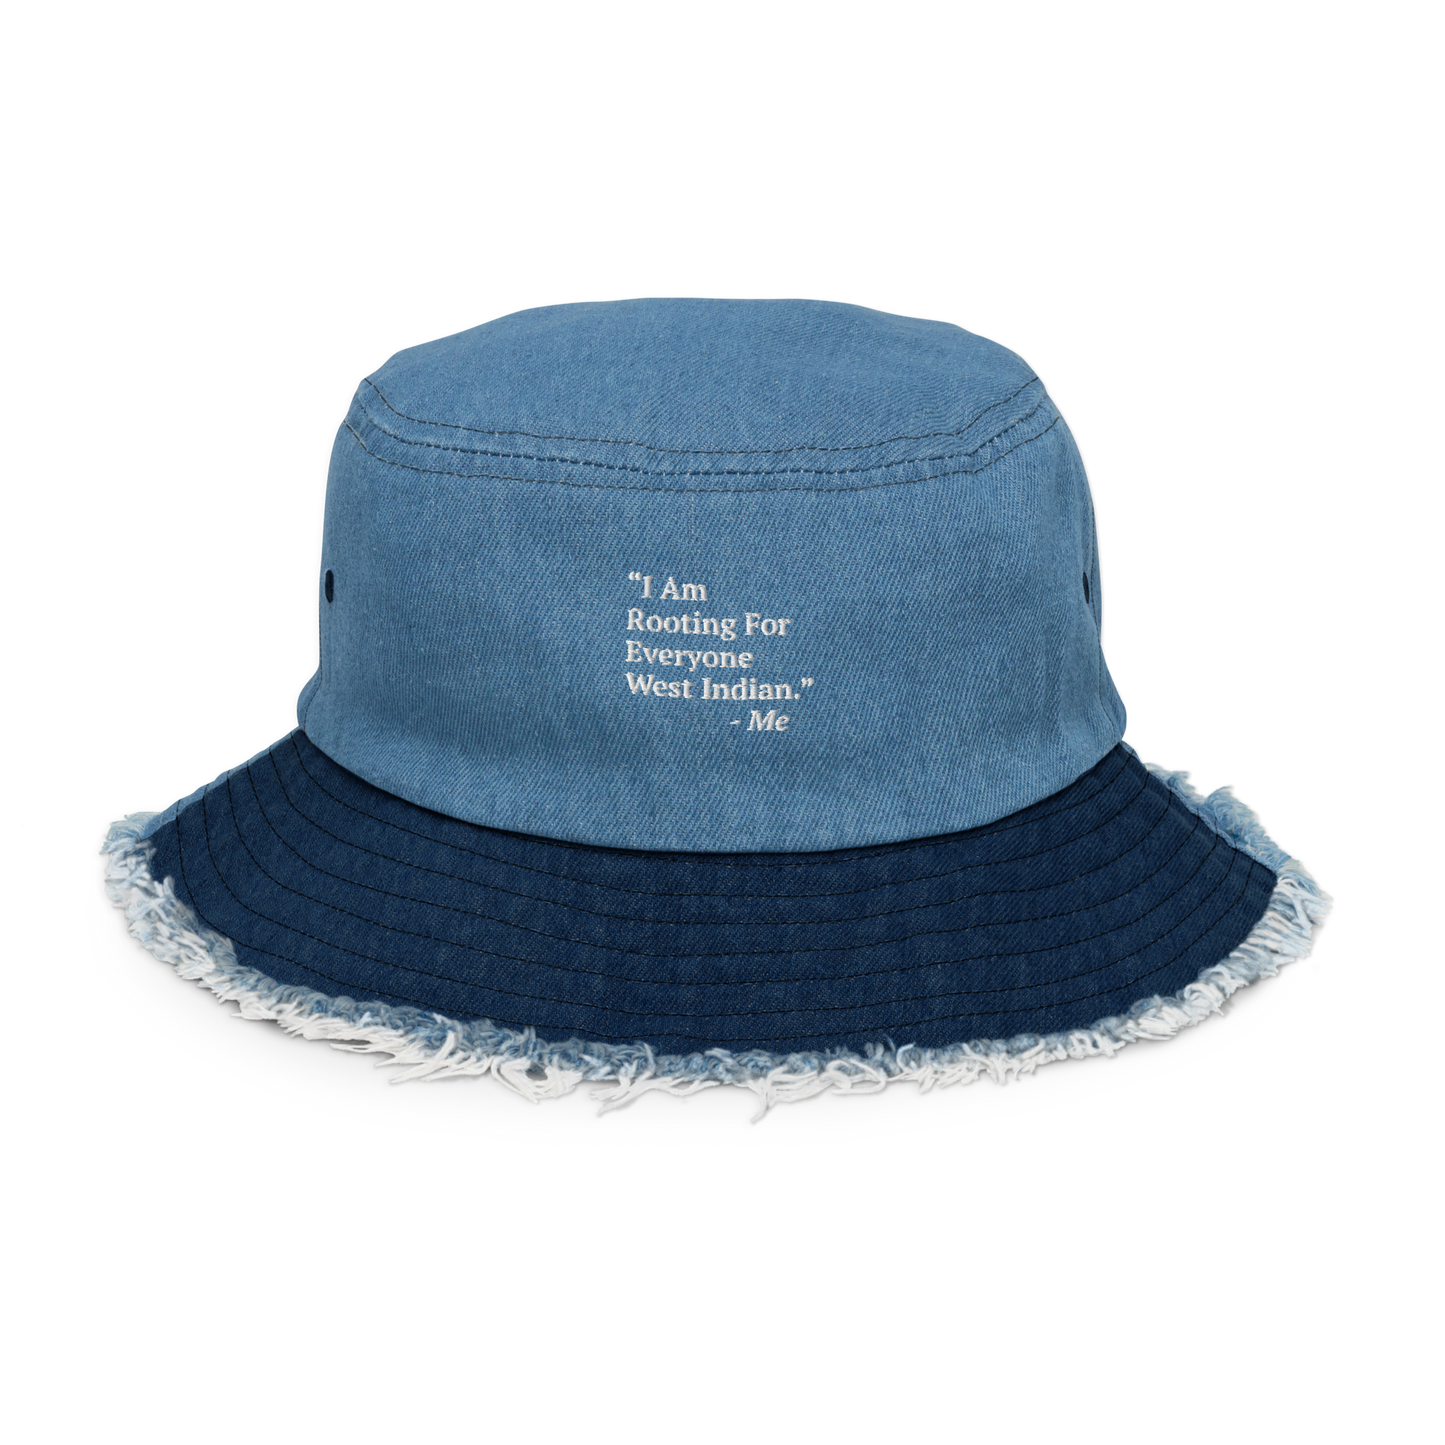 I Am Rooting: West Indian Distressed denim bucket hat